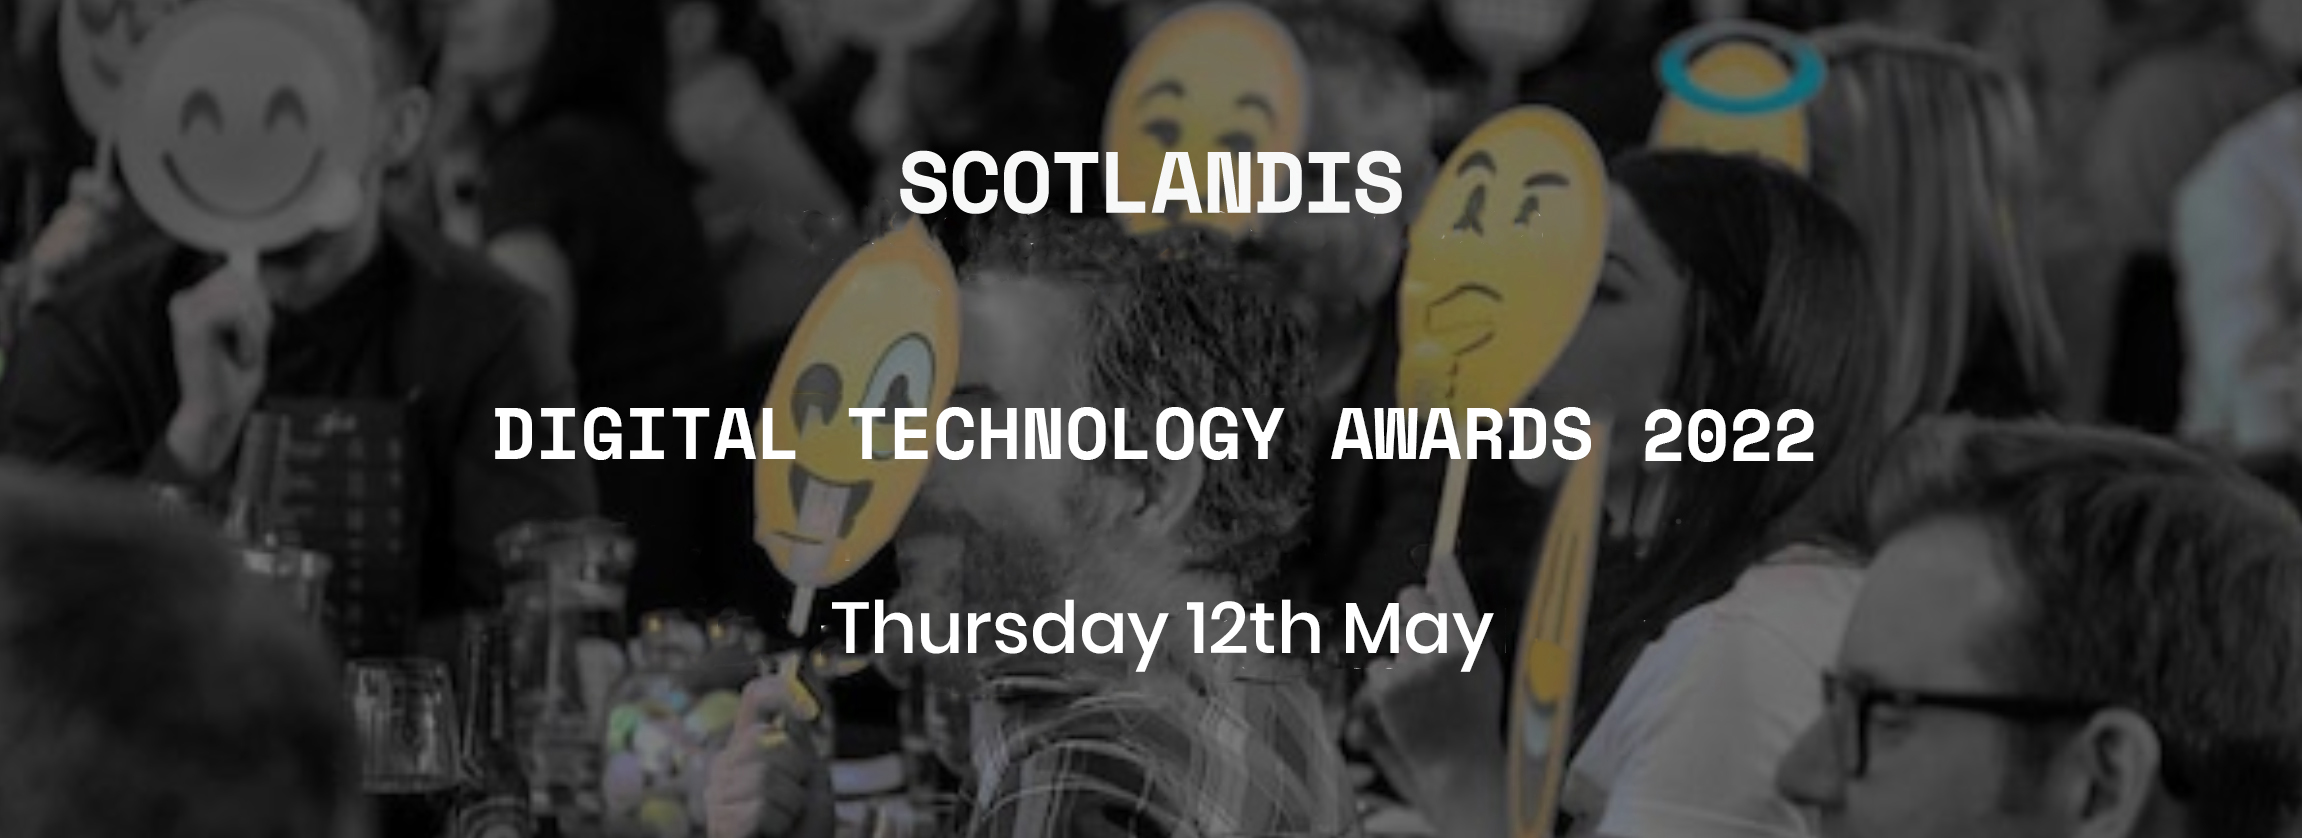 Search for Scotland’s very best digital technology innovation and talent is underway